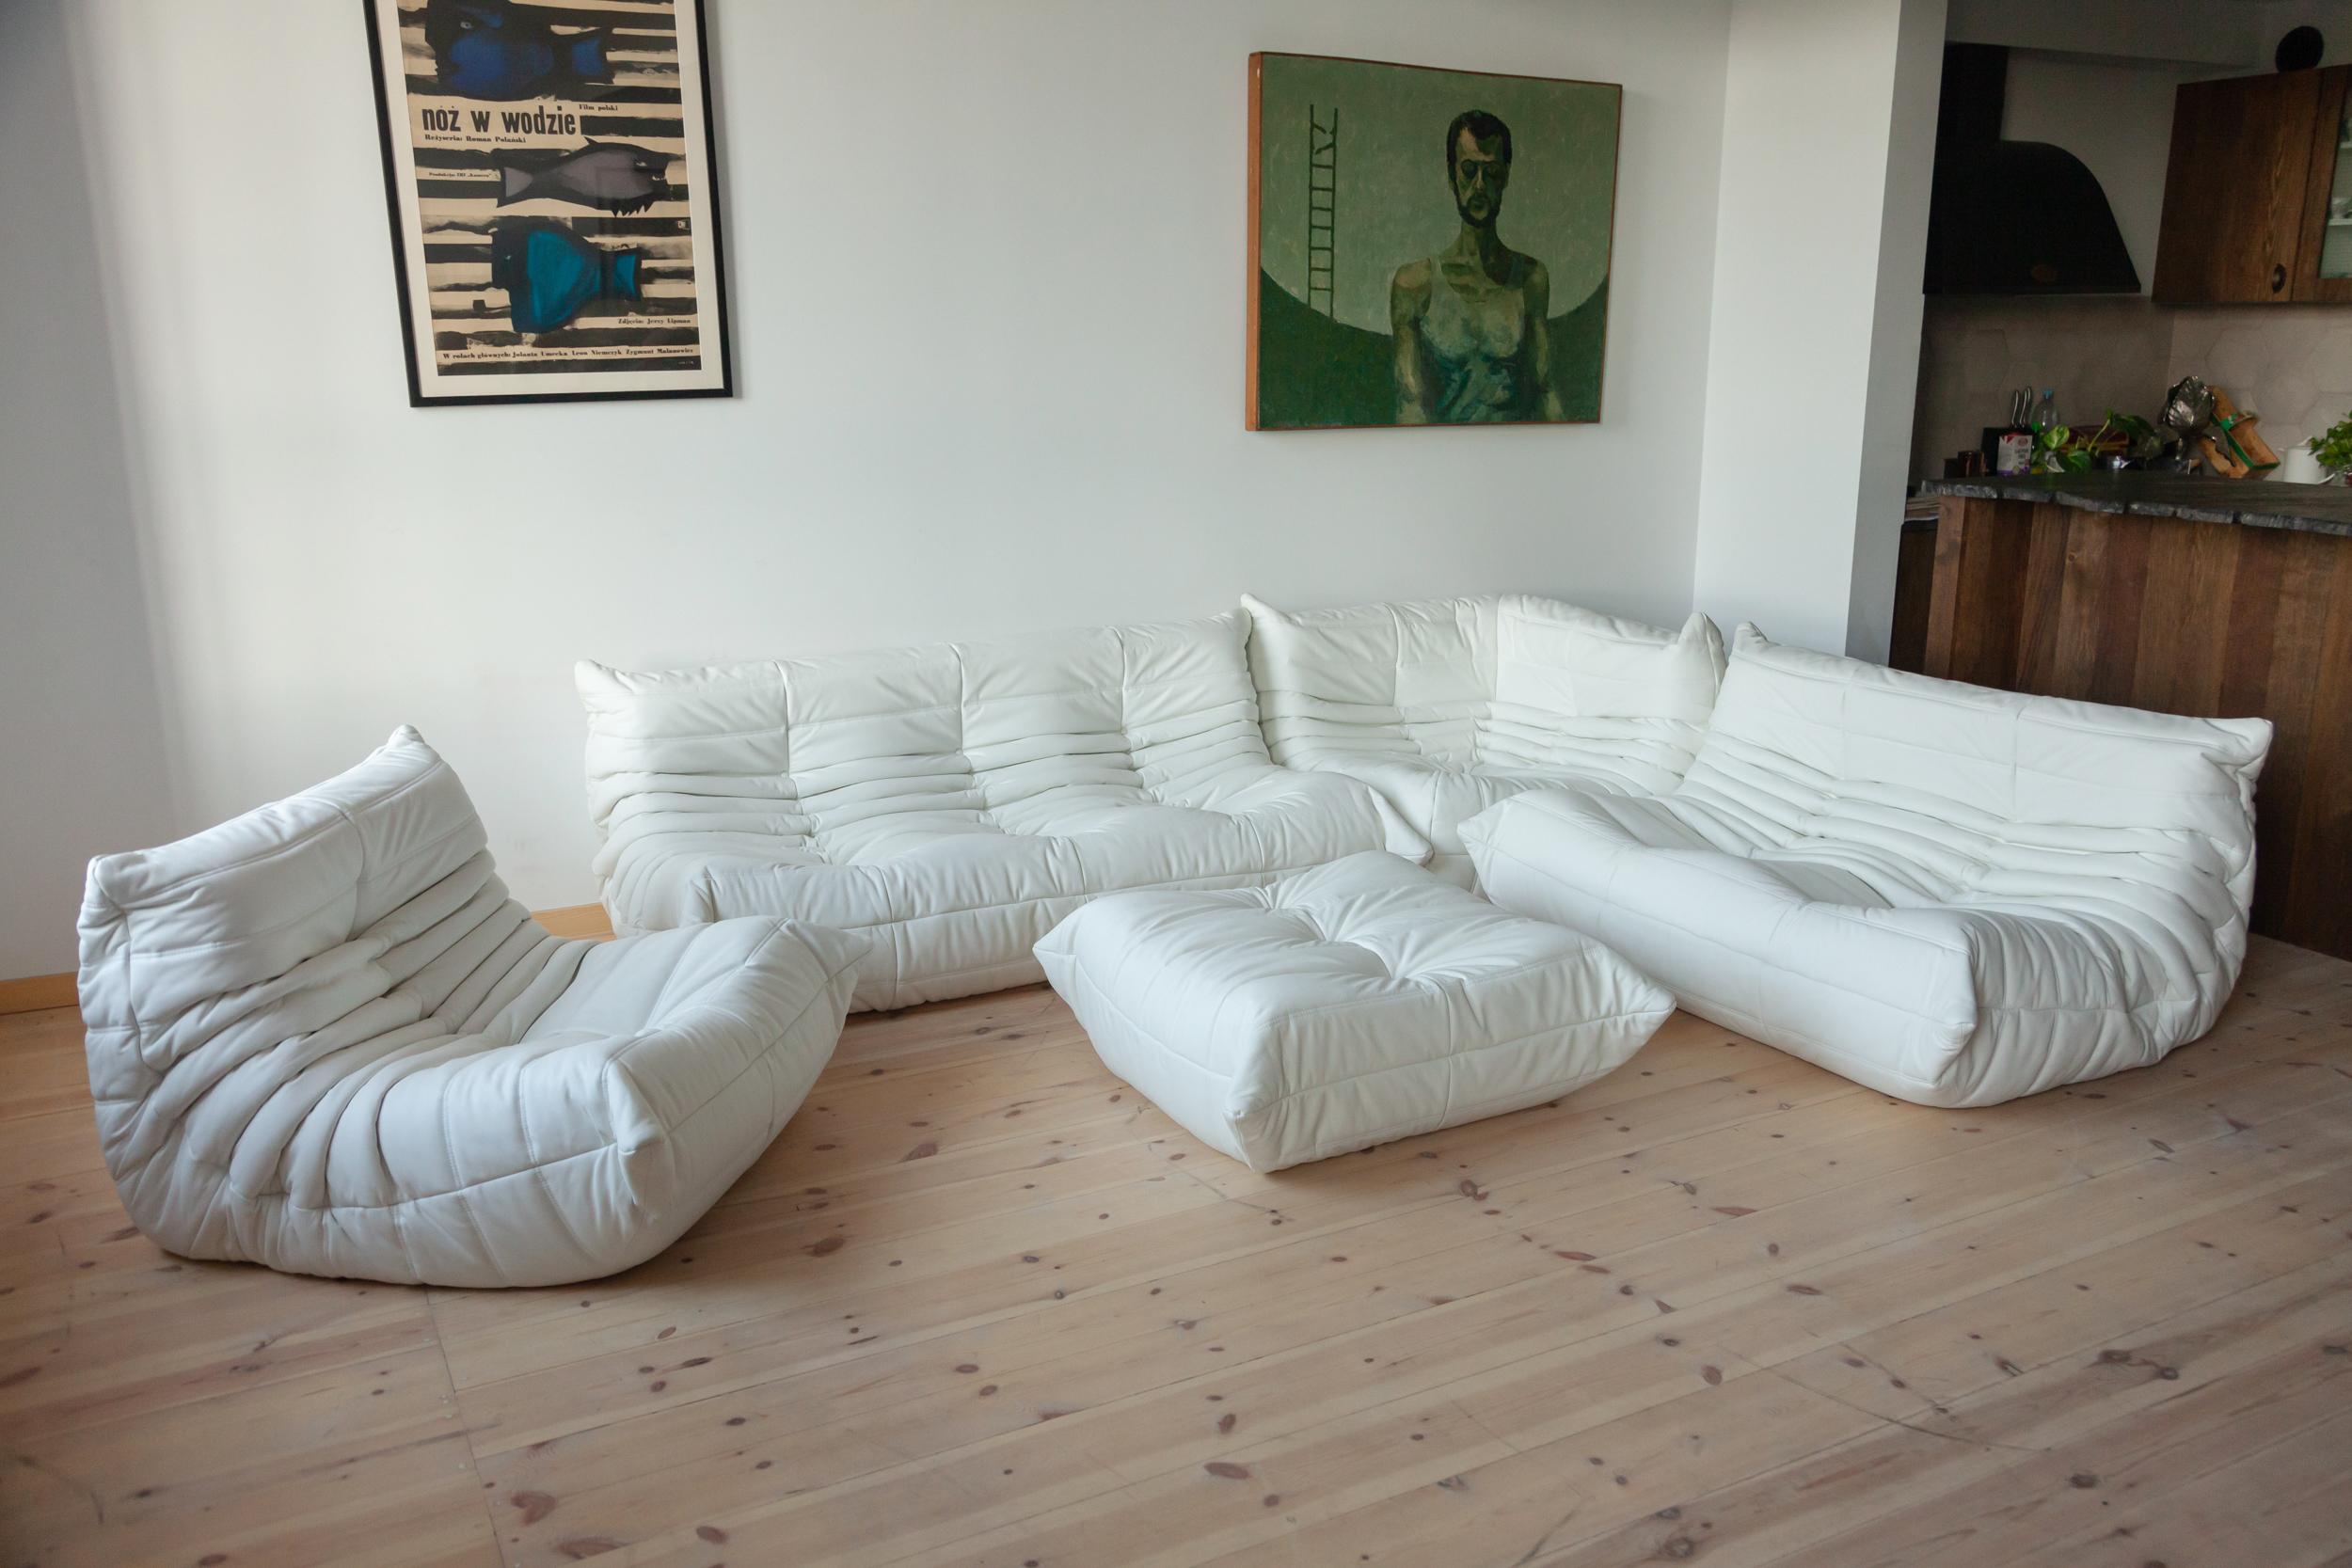 This Togo living room set was designed by Michel Ducaroy in 1973 and was manufactured by Ligne Roset in France. It has been reupholstered in new, great quality white leather and is made up of the following pieces: One three-seat couch (70 x 174 x